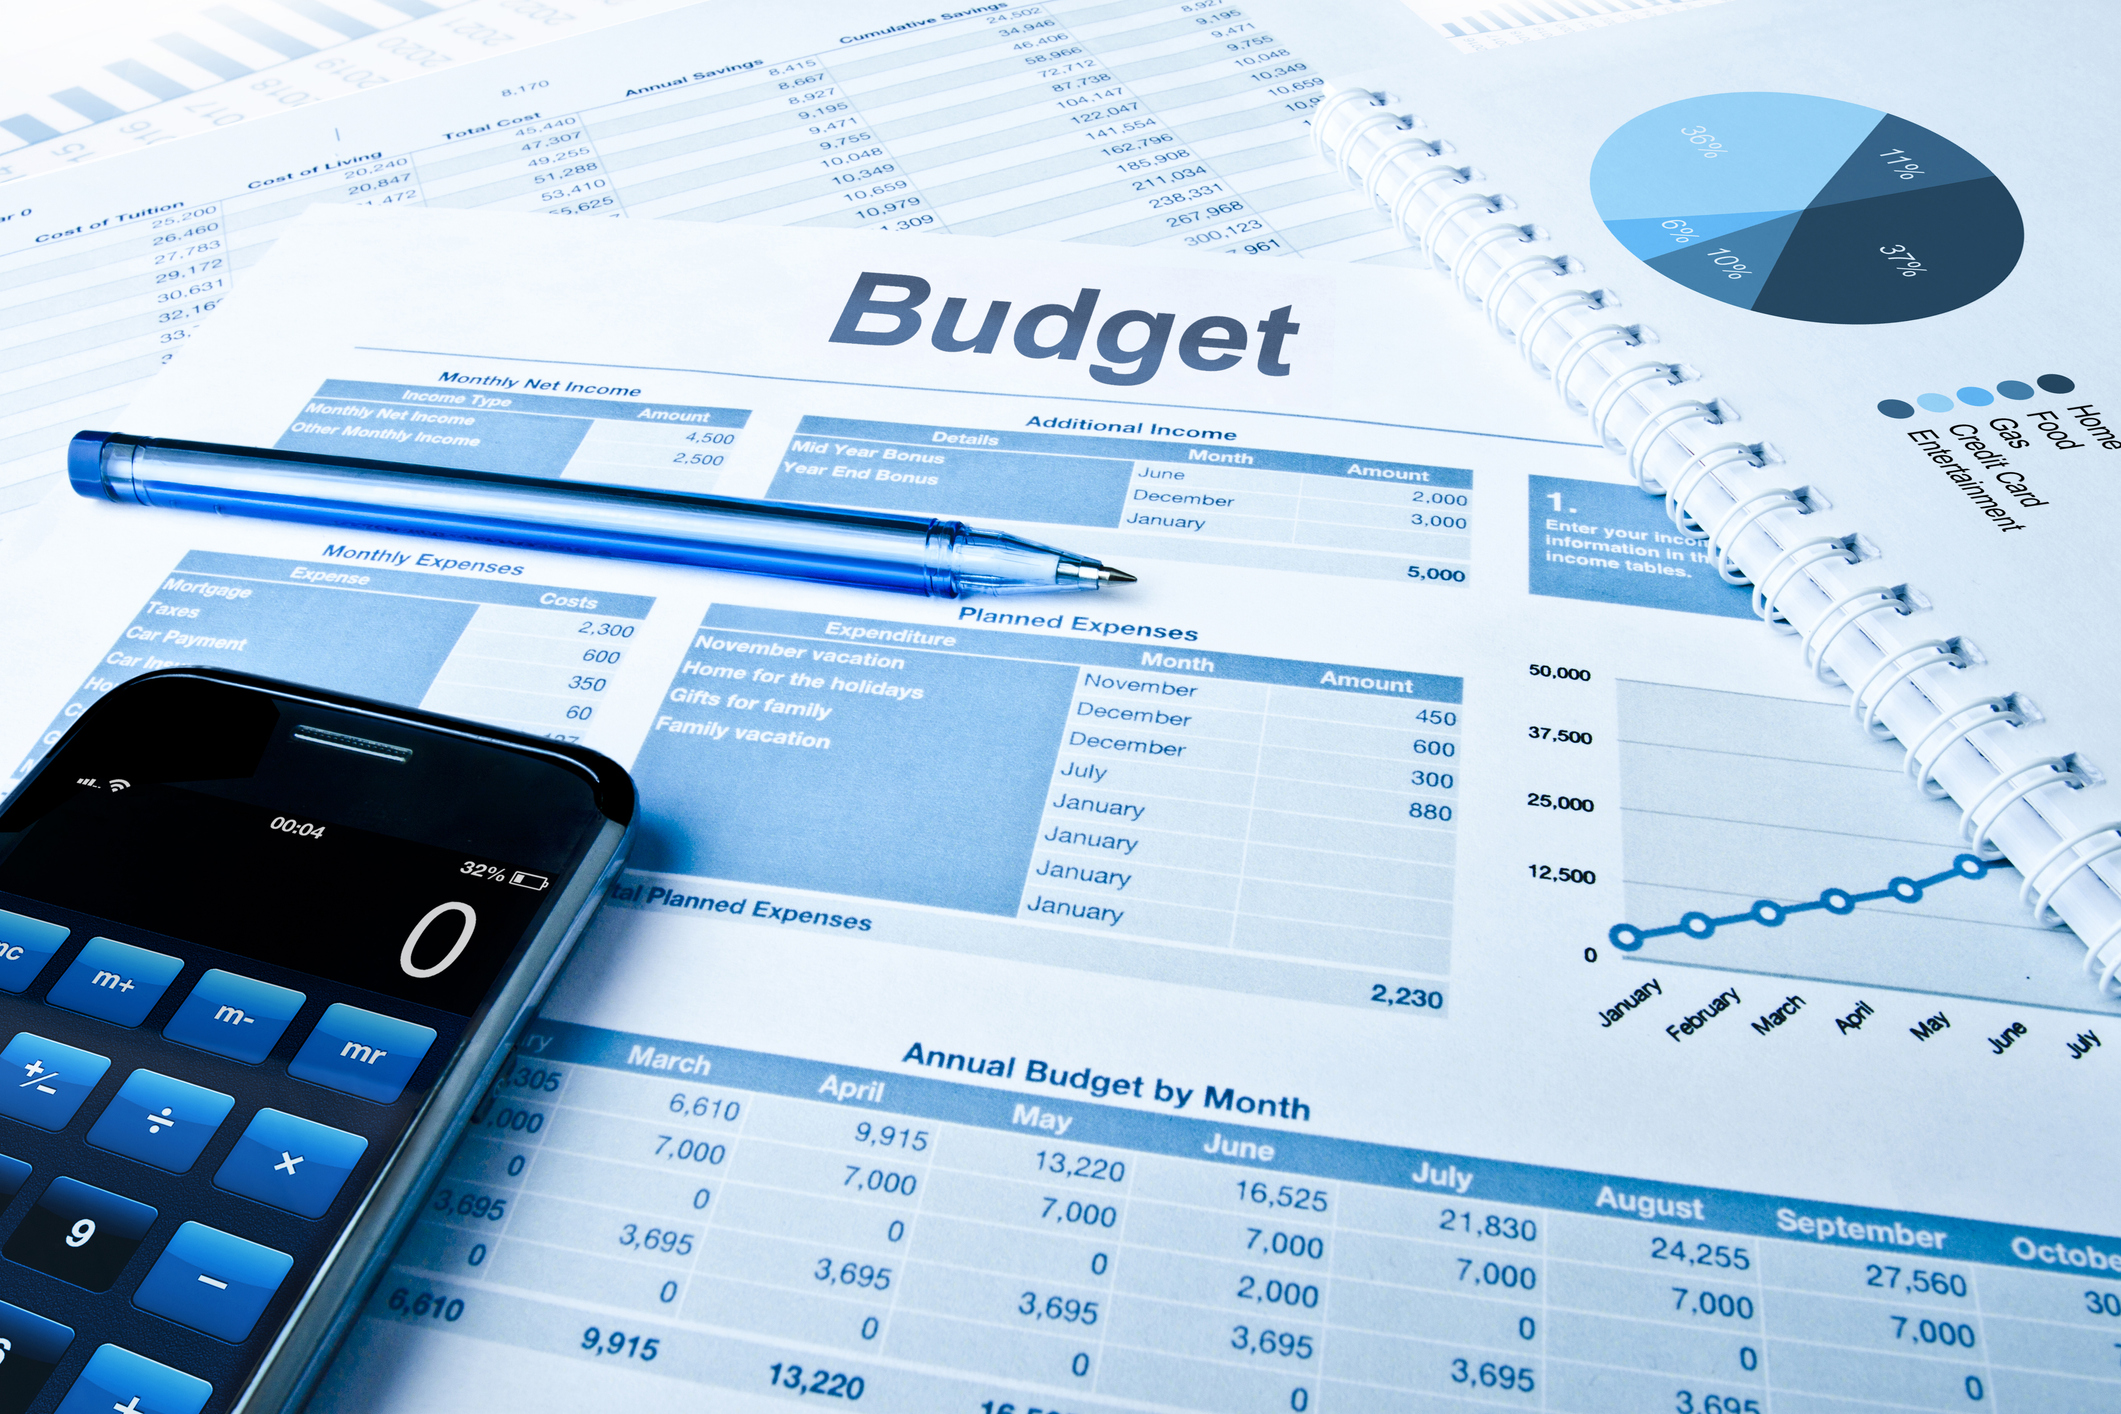 Featured image for “Build a Better Small Business Budget with These Key Tips”